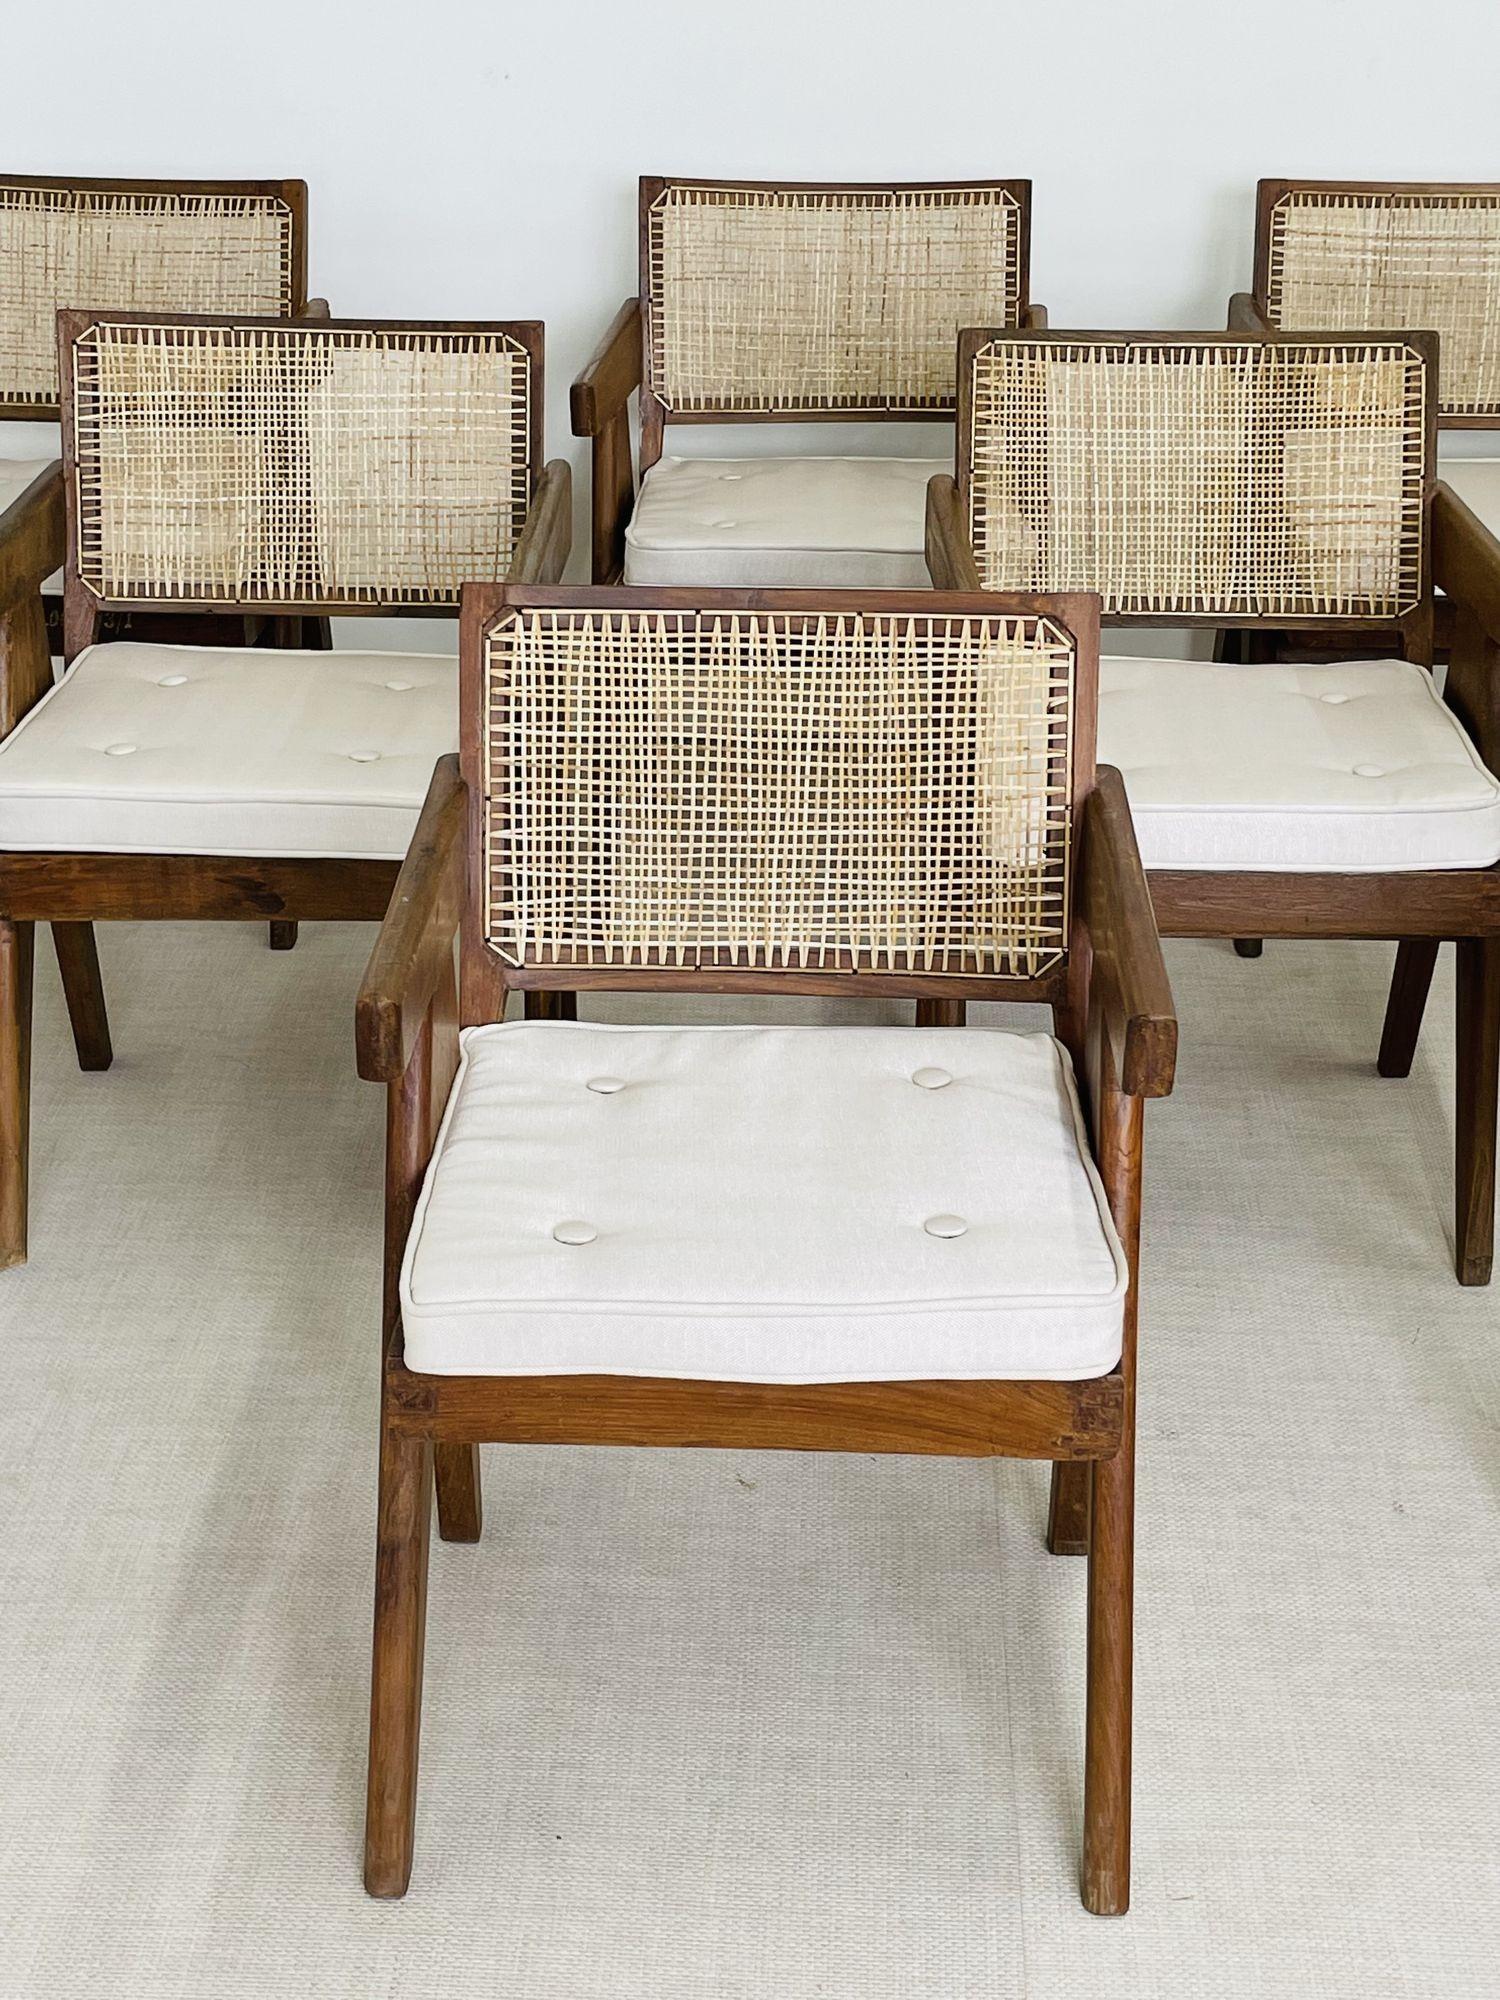 Pierre Jeanneret 'Office' Chairs, Model PJ-SI-28-B
 
Set of 3 fixed back arm chairs in teak and cane featuring a compass type double leg assembly while the backrest is slightly curved for added comfort. Each chair comes with a two inch new cream